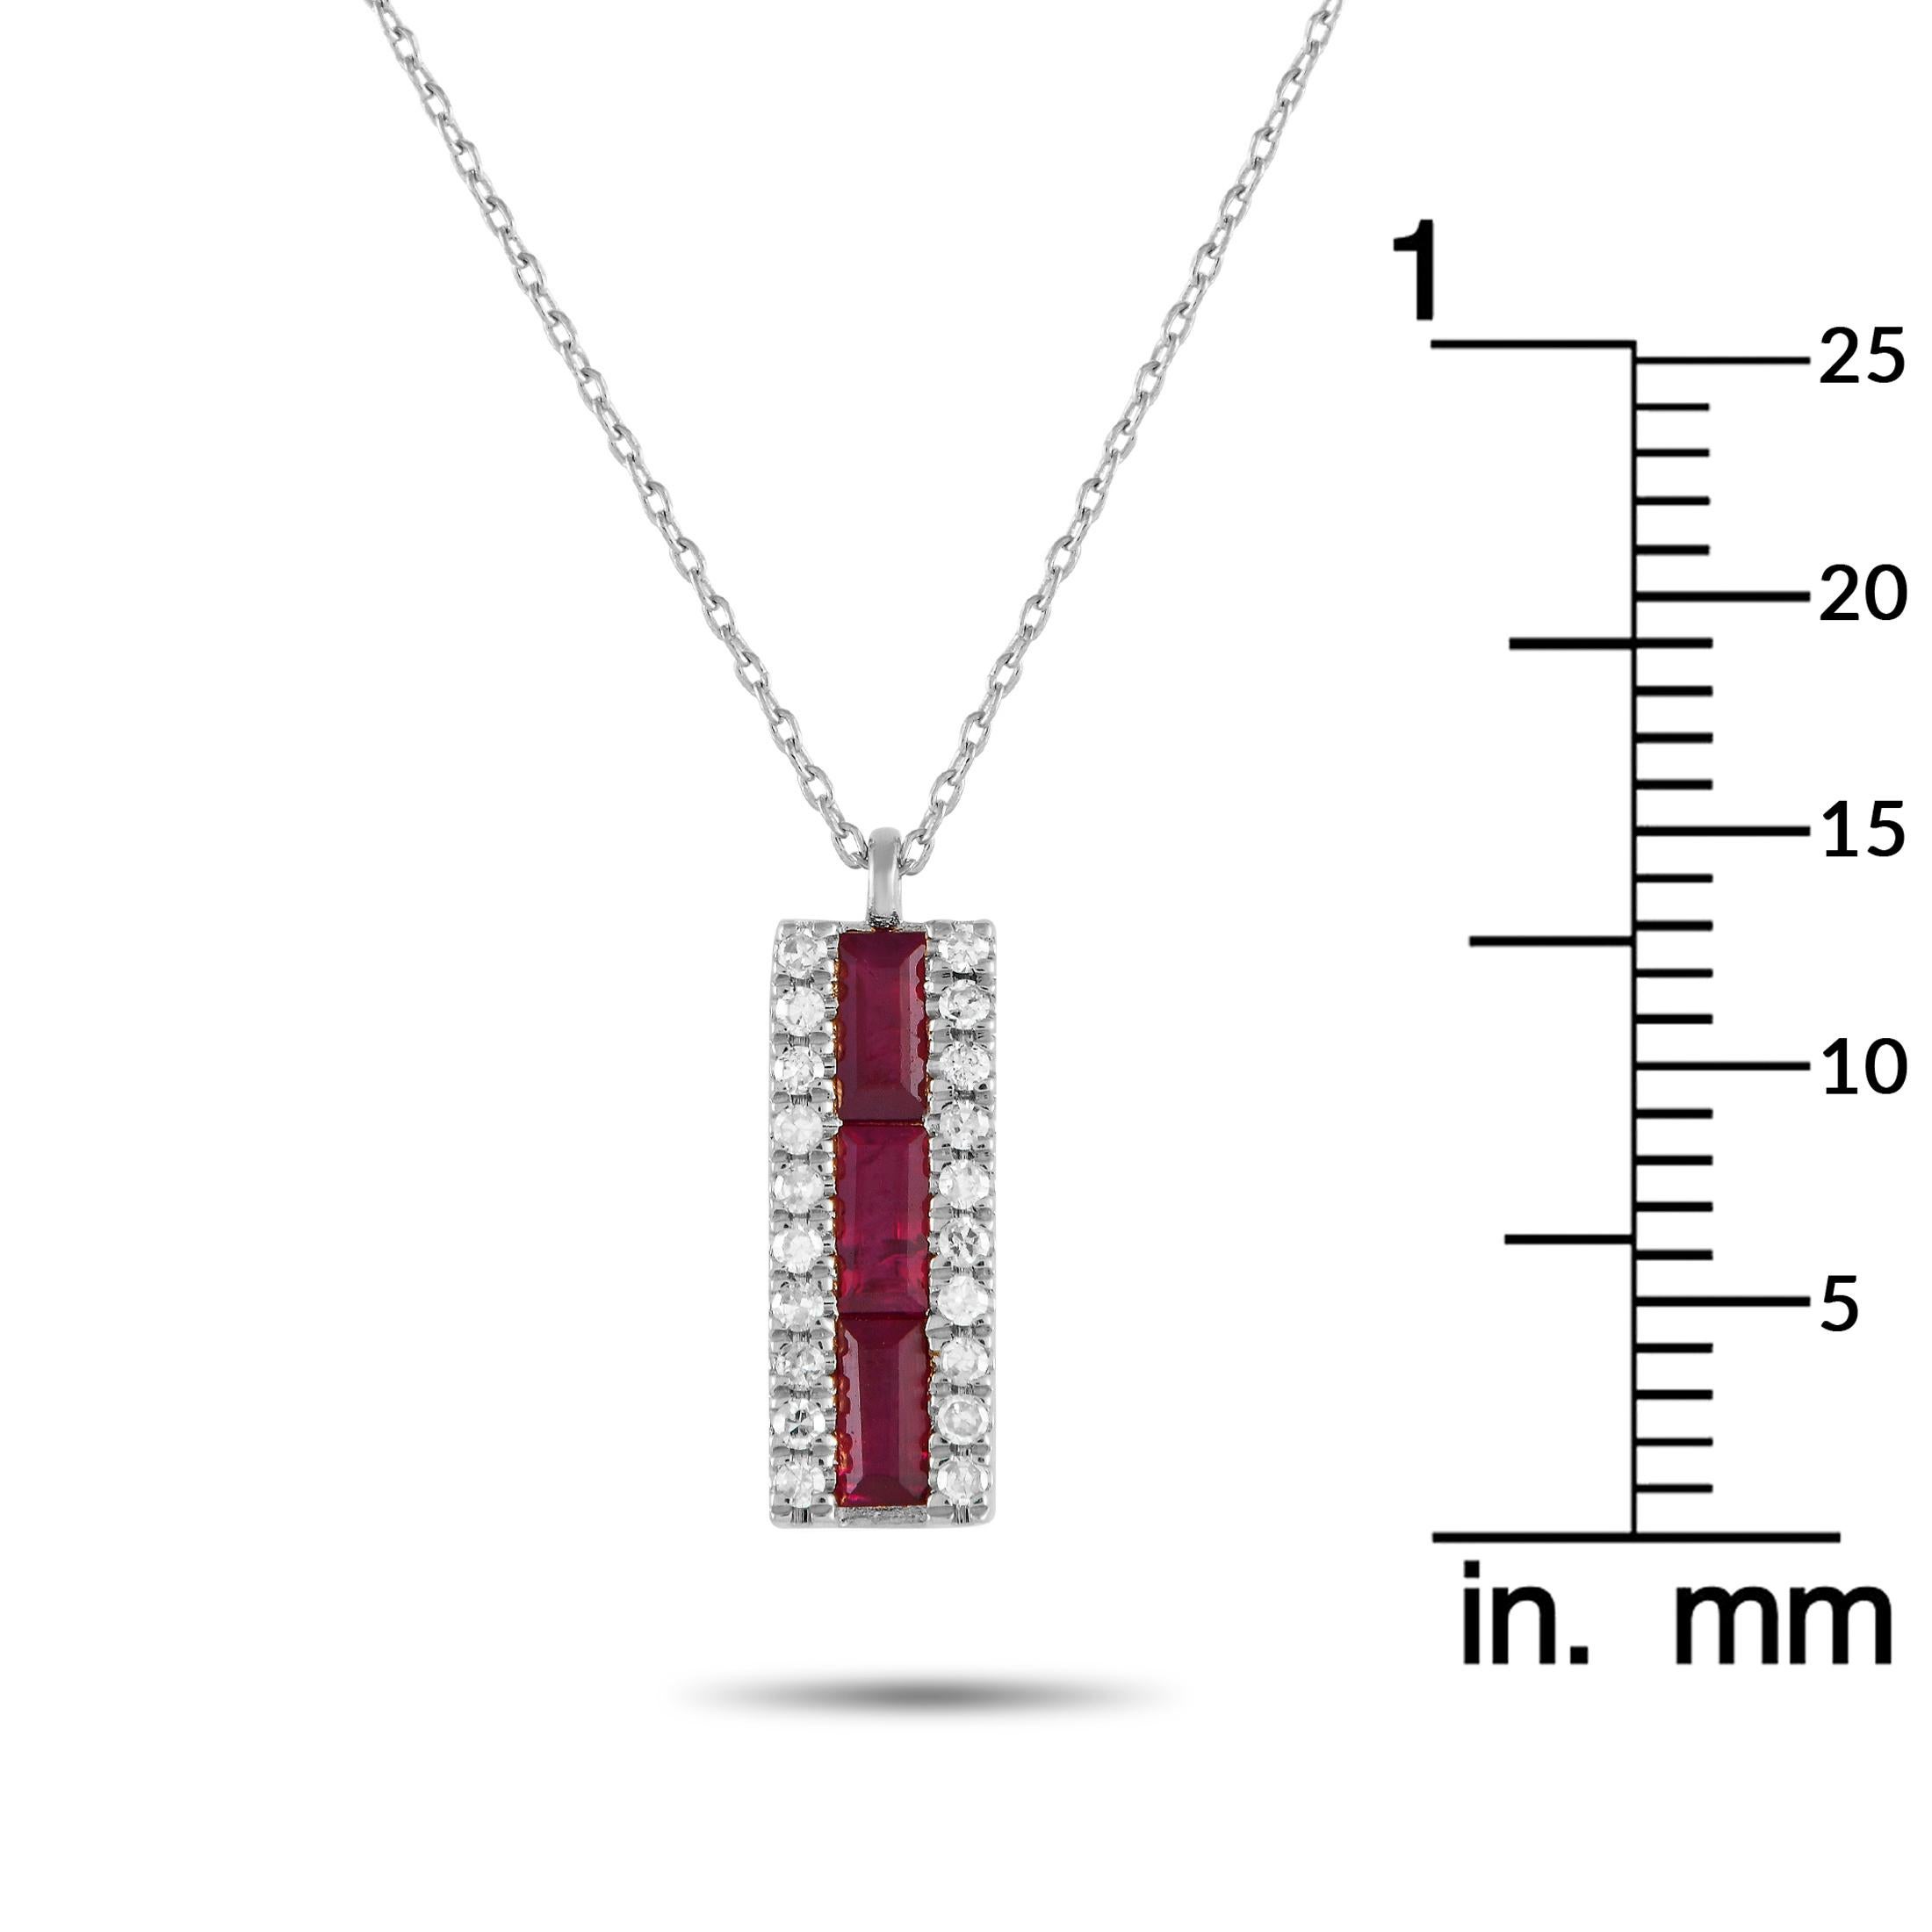 LB Exclusive 14K White Gold 0.10ct Diamond & Ruby Pendant Necklace PD4-16063WRU In New Condition For Sale In Southampton, PA